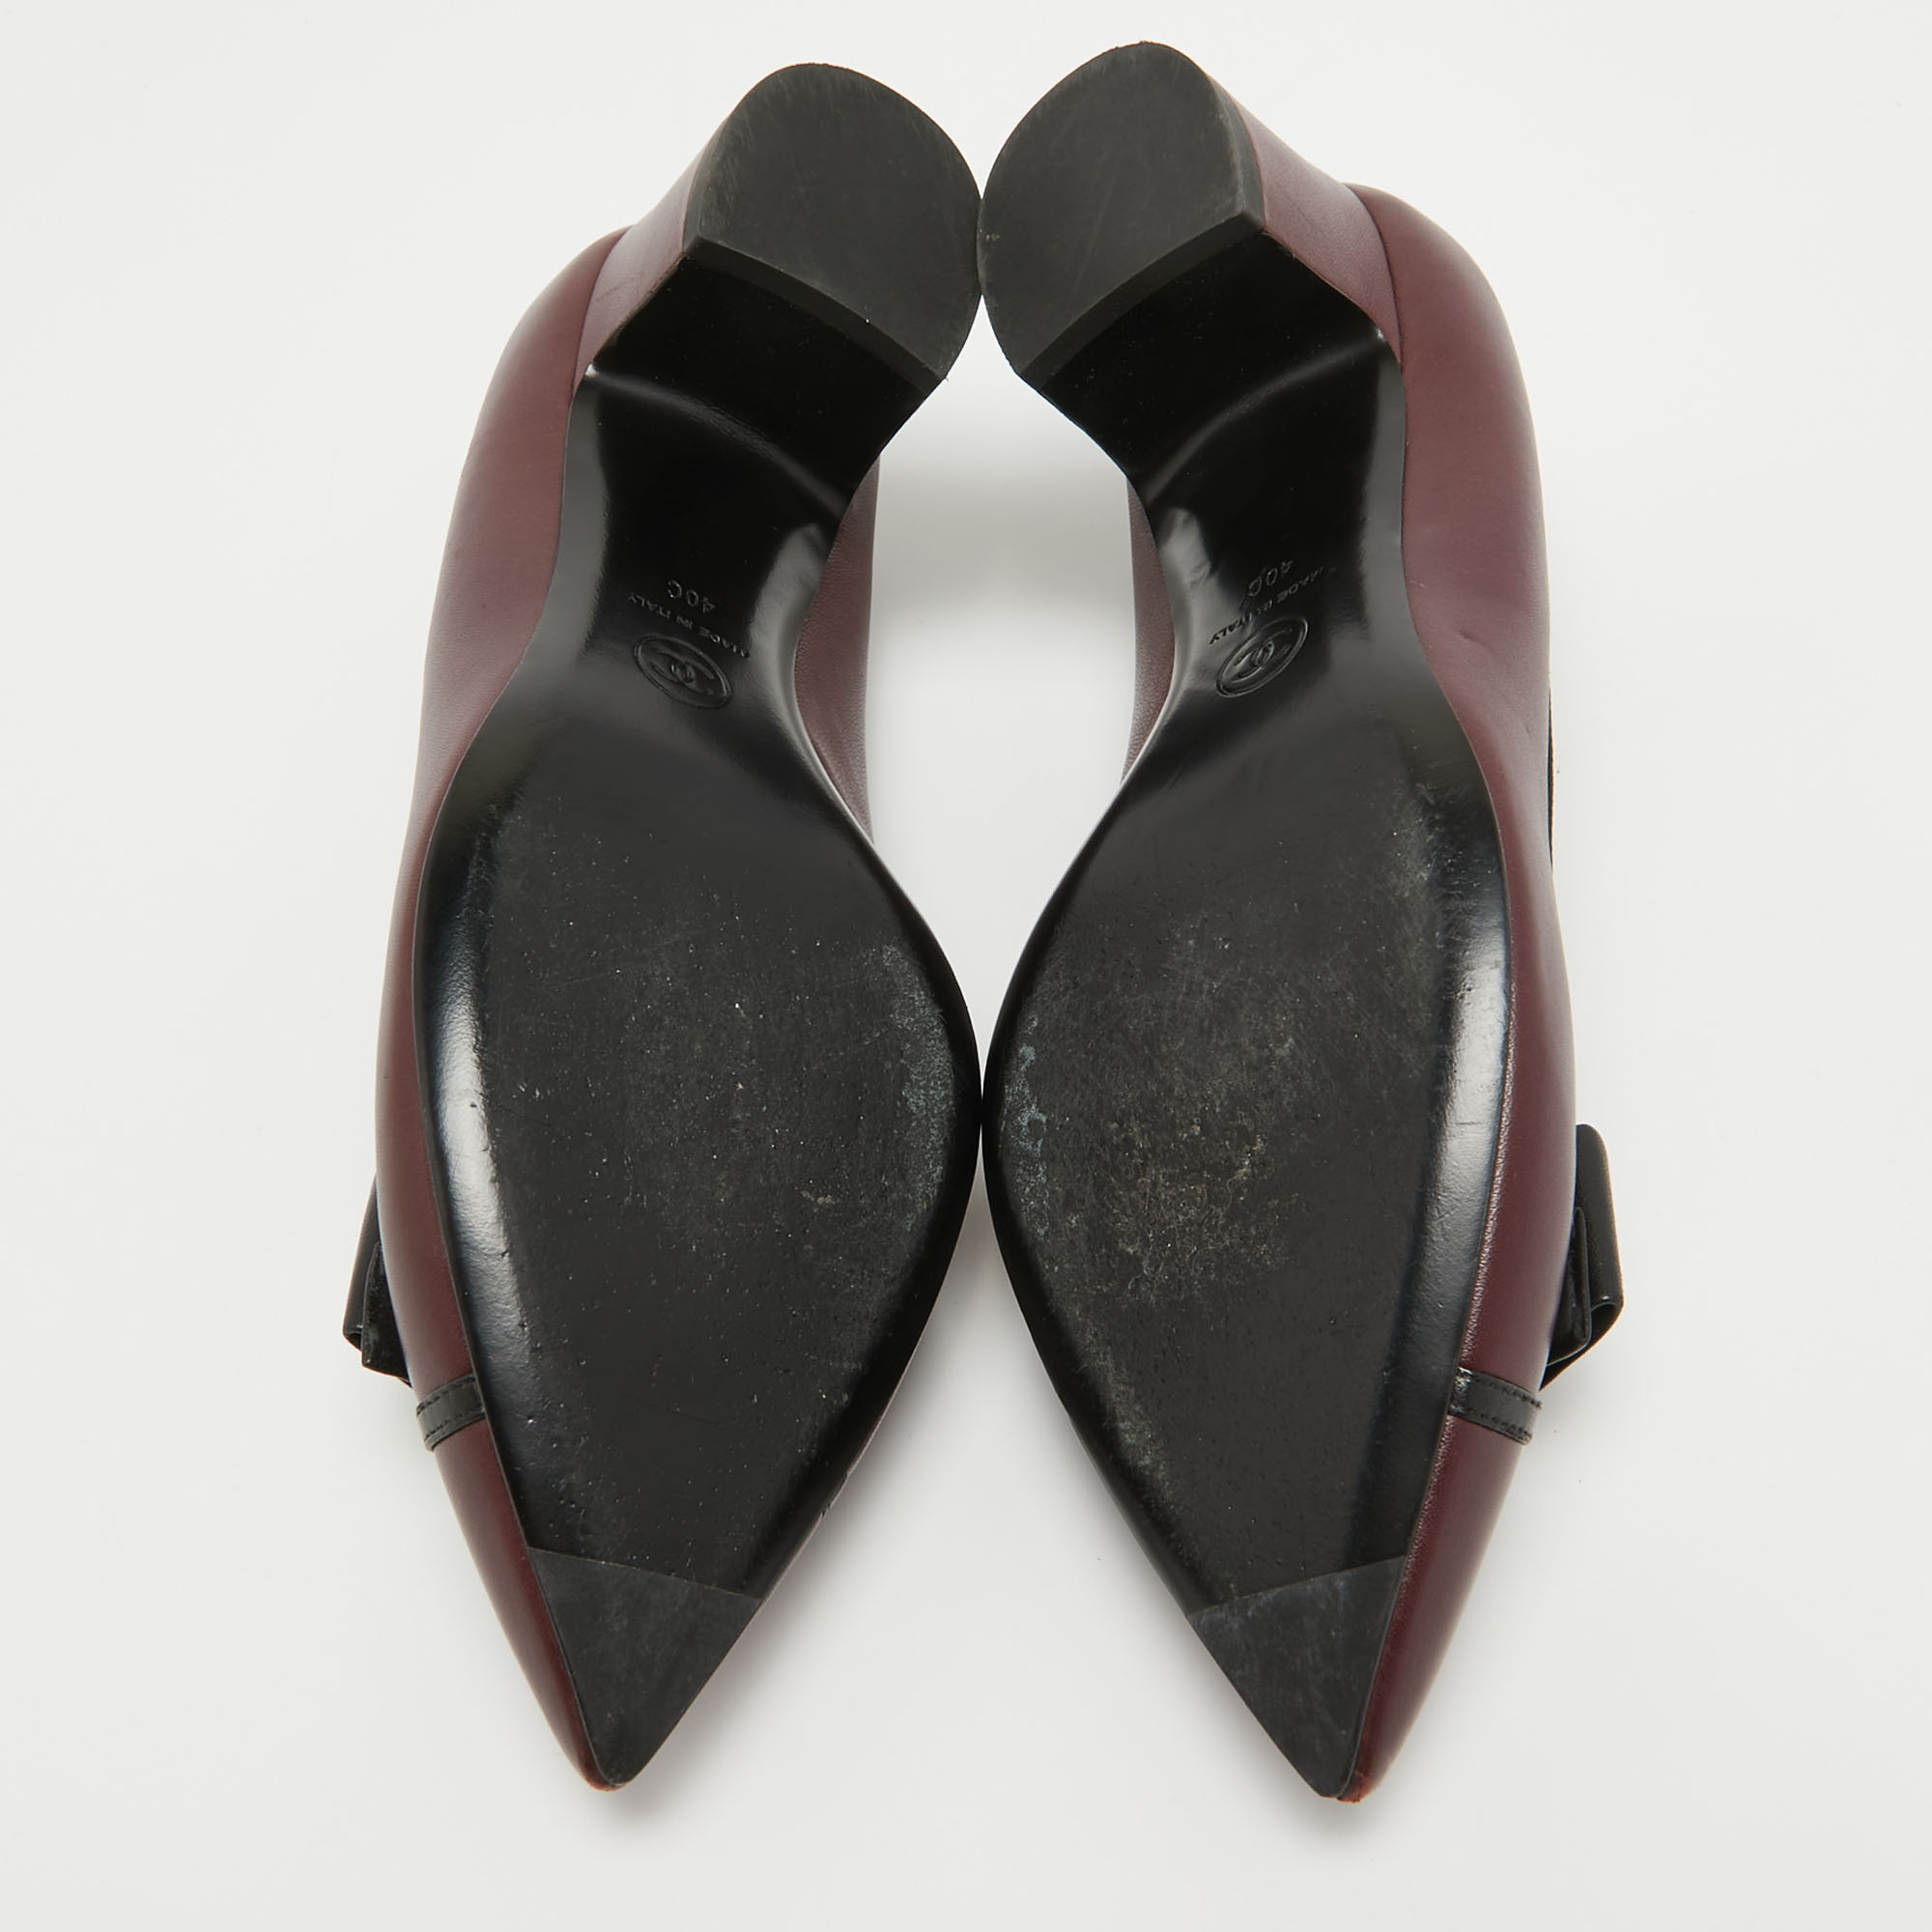 Chanel Burgundy/Black Leather Bow CC Pointed Toe Pumps Size 40